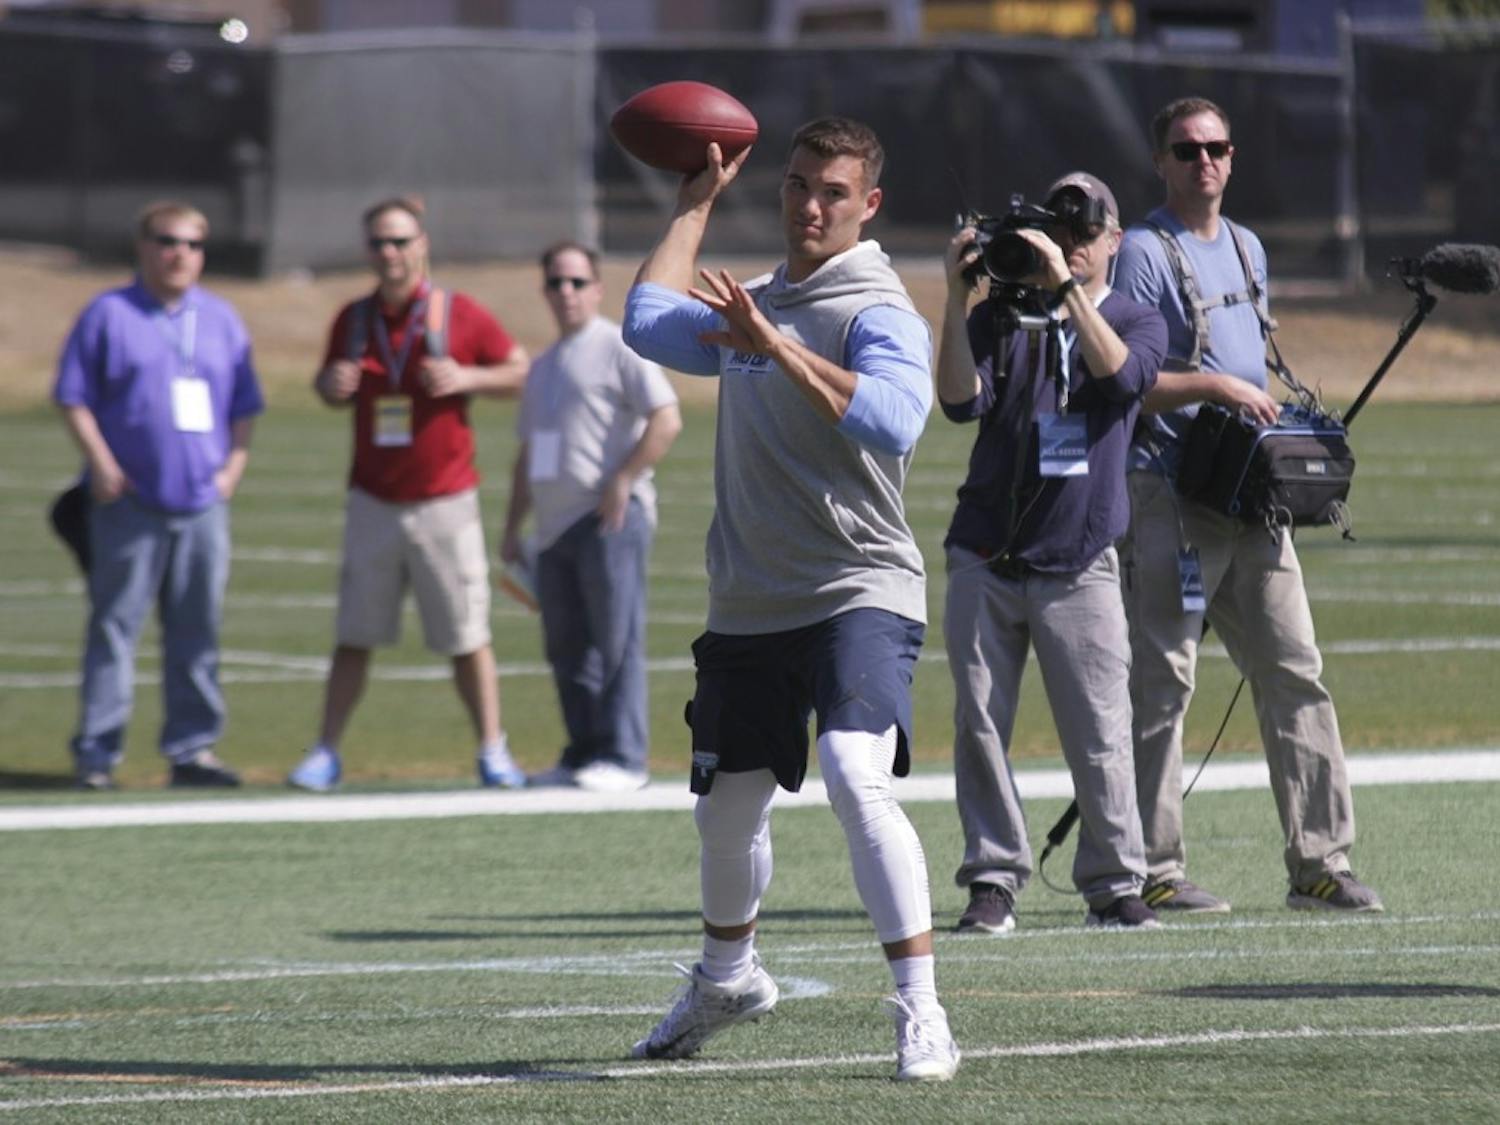 Former North Carolina quarterback Mitchell Trubisky throws a pass during UNC Pro Day.

